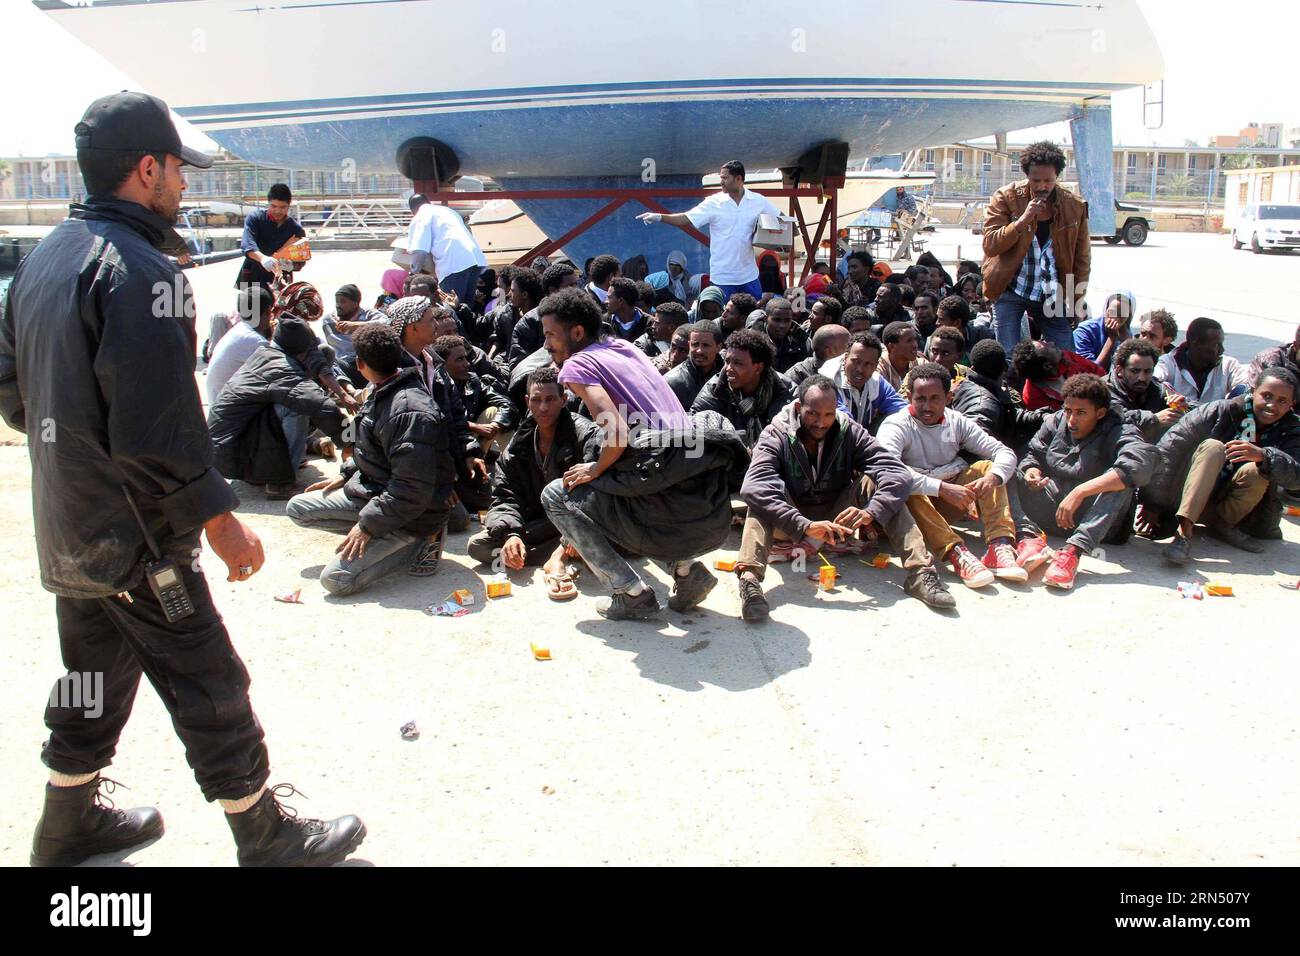 (150606) -- TRIPOLI, June 6 -- A batch of illegal immigrants sit on the ground after being detained by Libyan coast guard near Garabulli, Libya on June 6, 2015. The Libyan coast guard intercepted dozens of sub-Saharan nationals trying to stow away to Europe from Libyan coast. ) LIBYA-GARABULLI-ILLEGAL IMMIGRANTS HamzaxTurkia PUBLICATIONxNOTxINxCHN   Tripoli June 6 a Batch of illegal Immigrants Sit ON The Ground After Being detained by Libyan Coast Guard Near GARABULLI Libya ON June 6 2015 The Libyan Coast Guard intercepted Dozens of Sub Saharan Nationals trying to stow Away to Europe from Liby Stock Photo